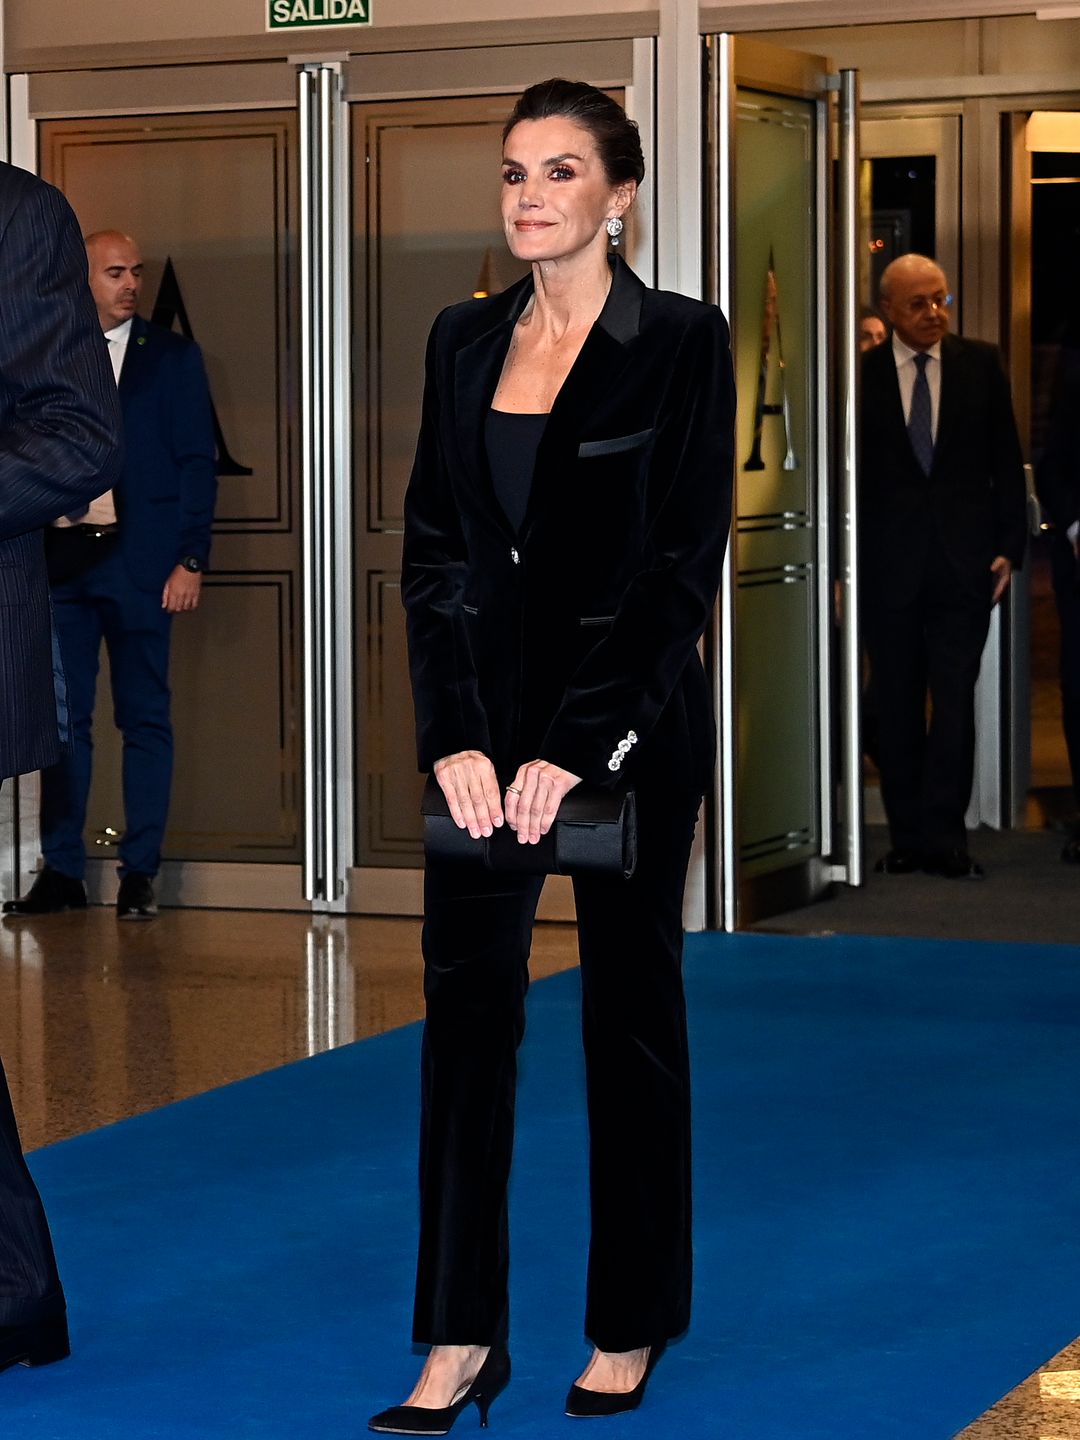  Queen Letizia of Spain wears a velvet black suit and heels, an updo hairstyle and a pair of black heels while on offical royal business in Spain